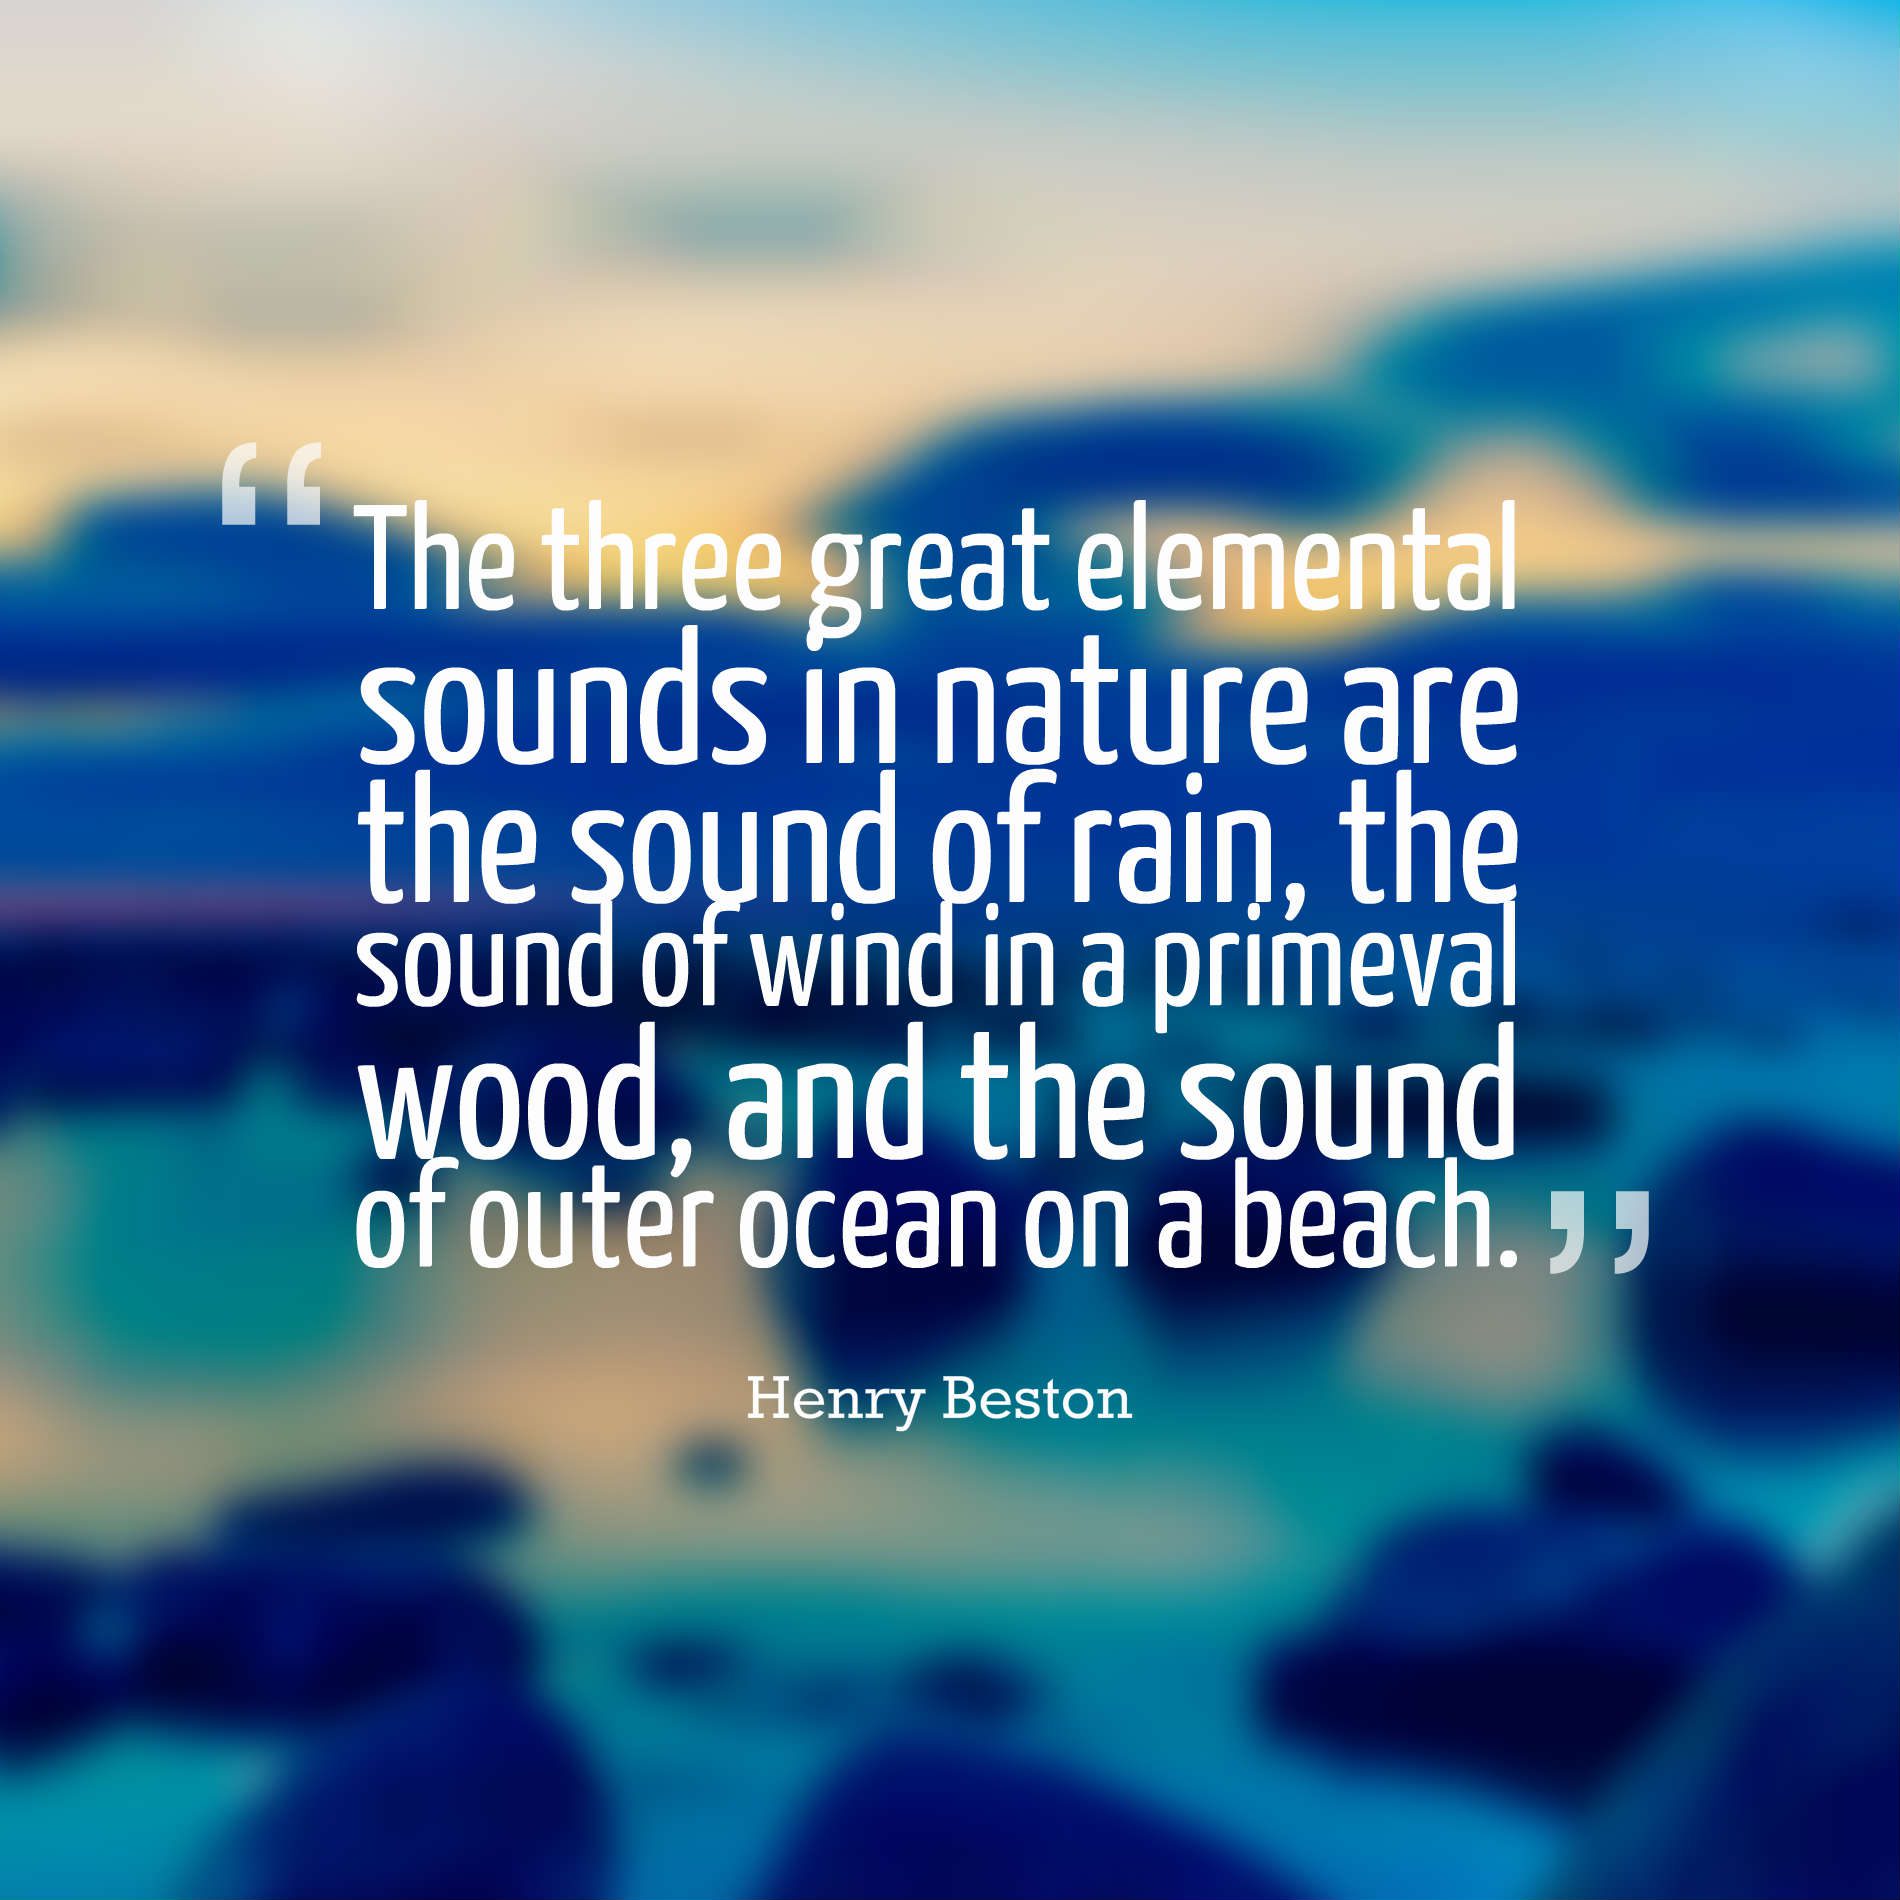 The three great elemental sounds in nature are the sound of rain, the sound of wind in a primeval wood, and the sound of outer ocean on a beach.